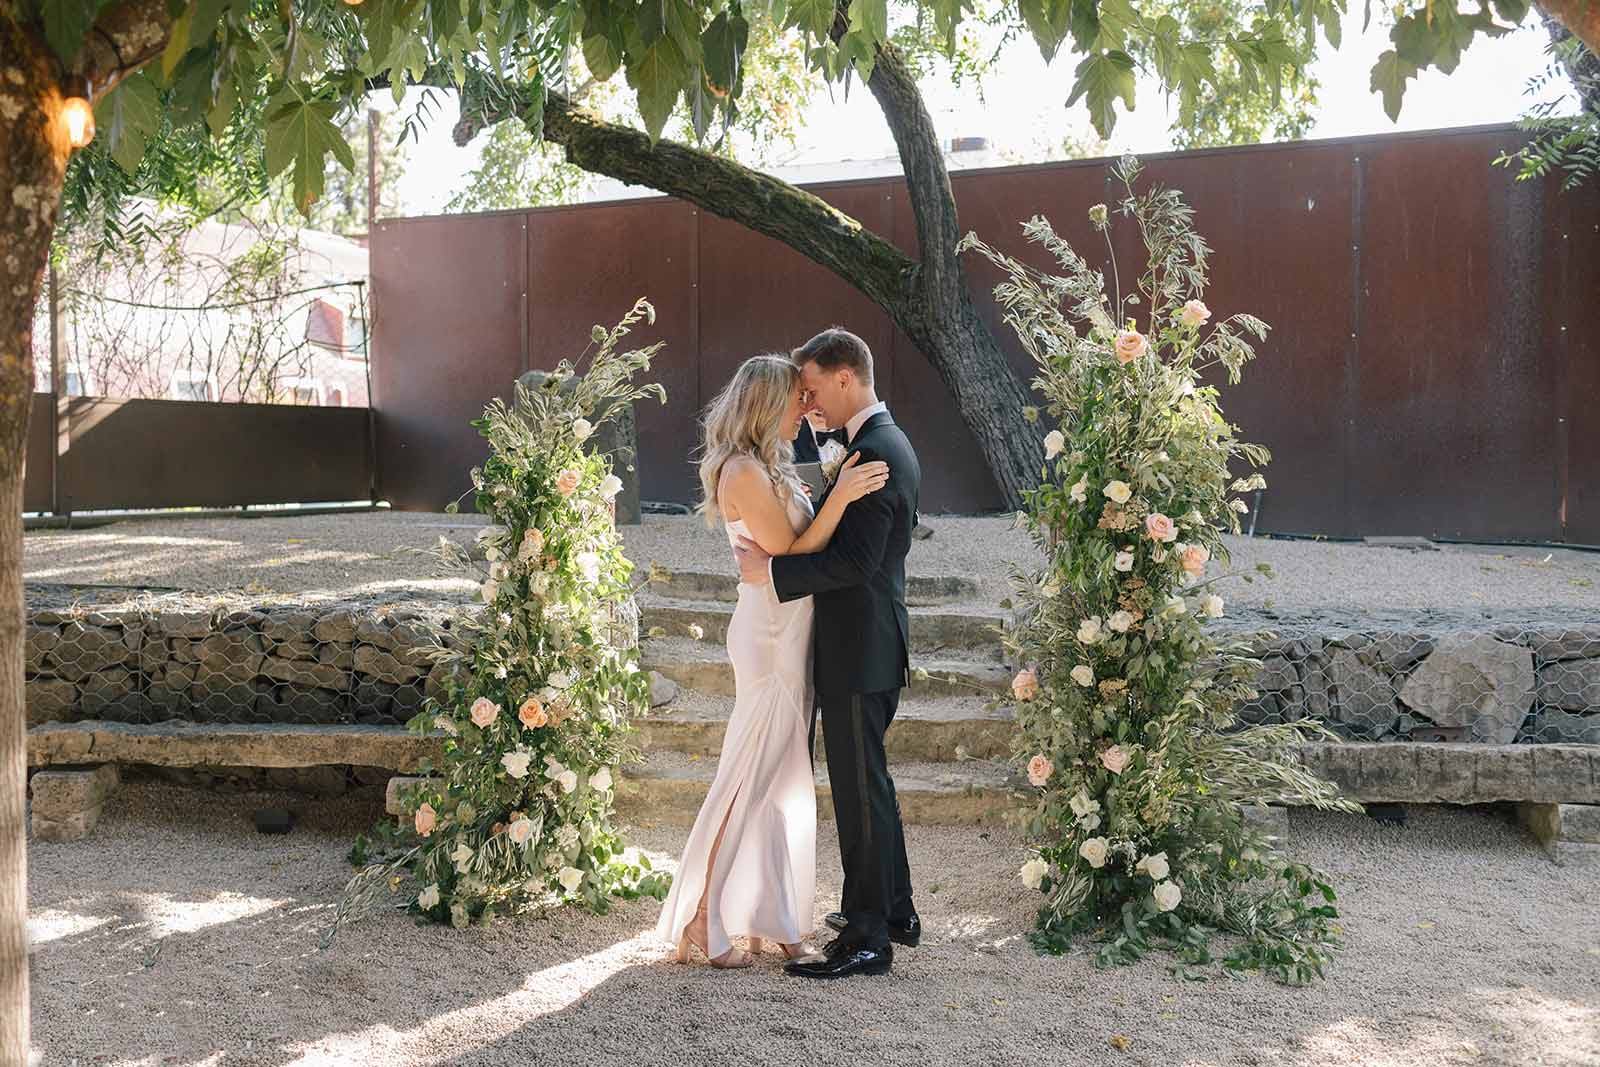 the bride and groom touching foreheads at a natural wild flower outdoor altar